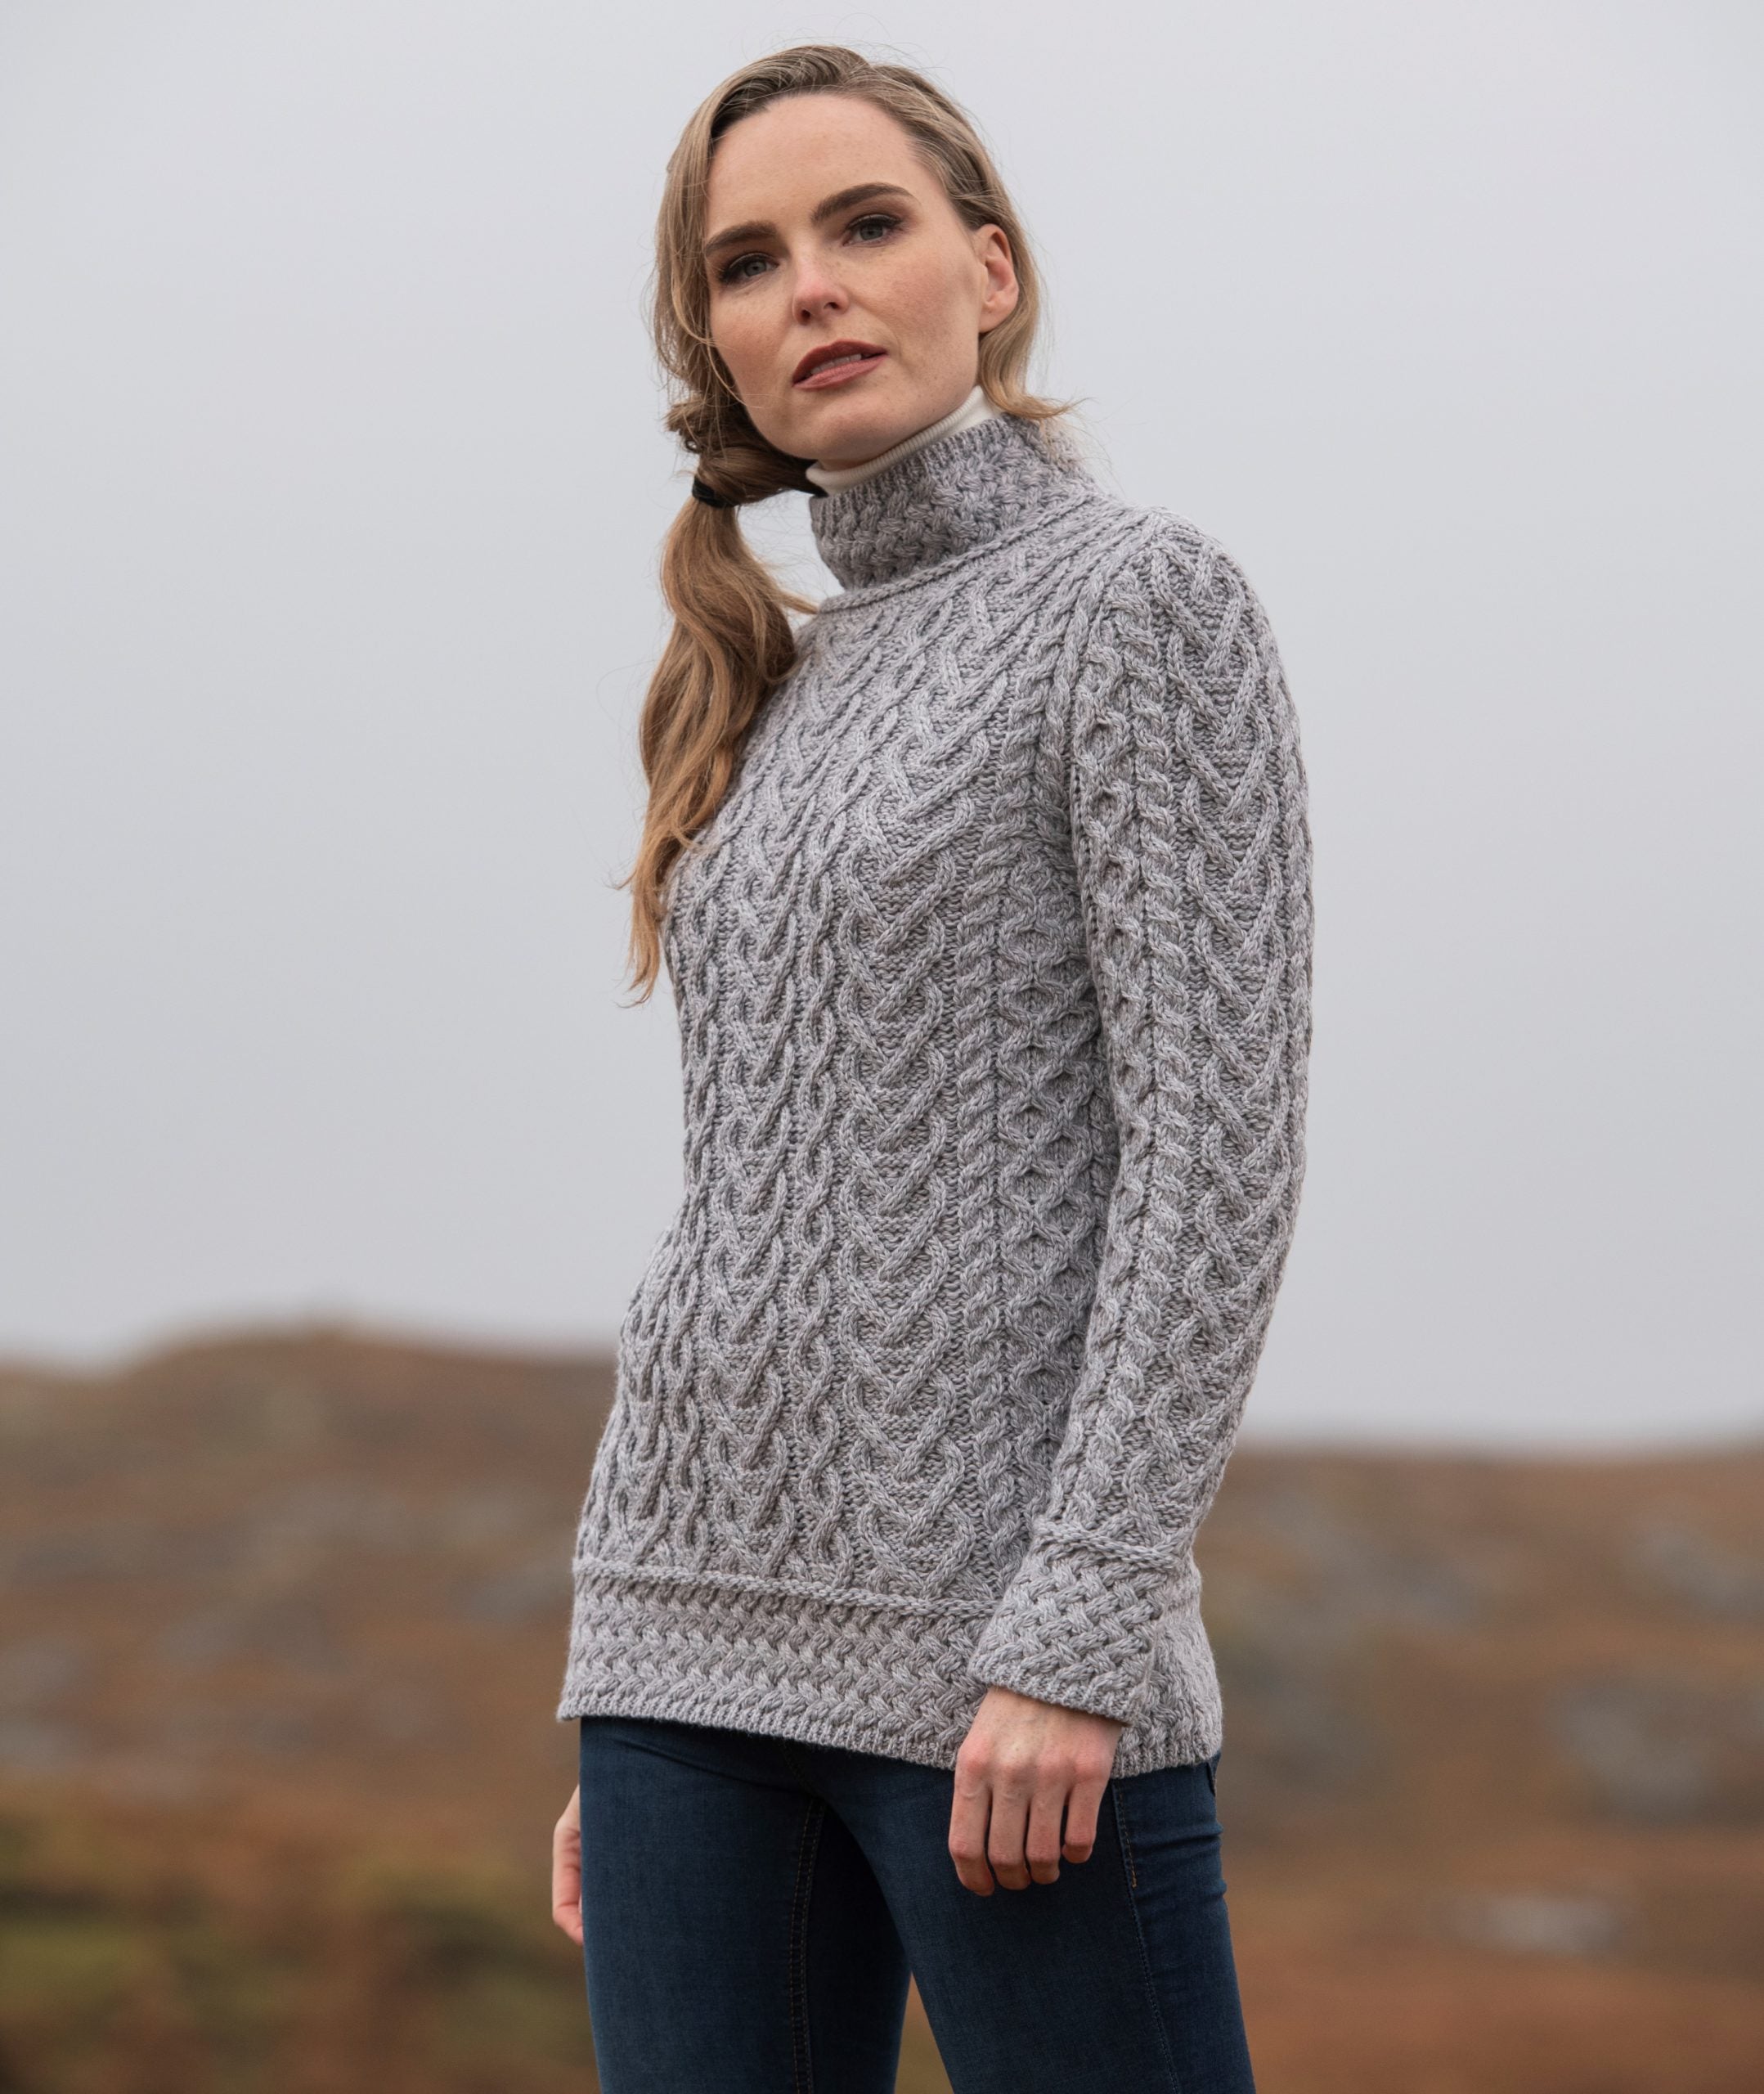 West End Knitwear, Luxurious Cable Knit High Neck Sweater